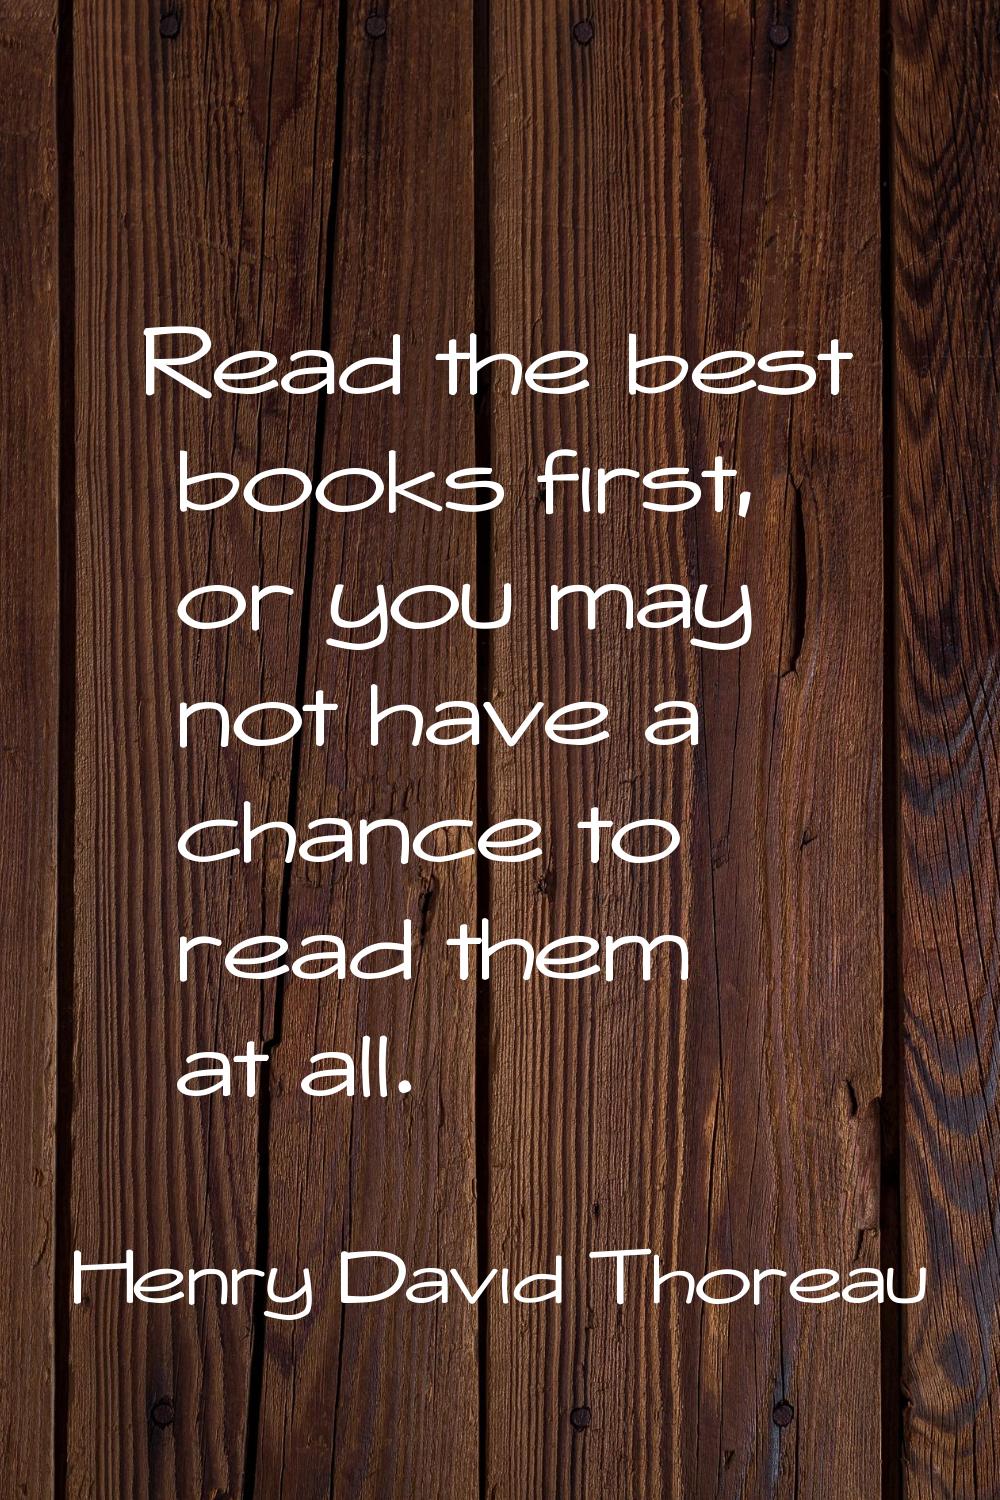 Read the best books first, or you may not have a chance to read them at all.